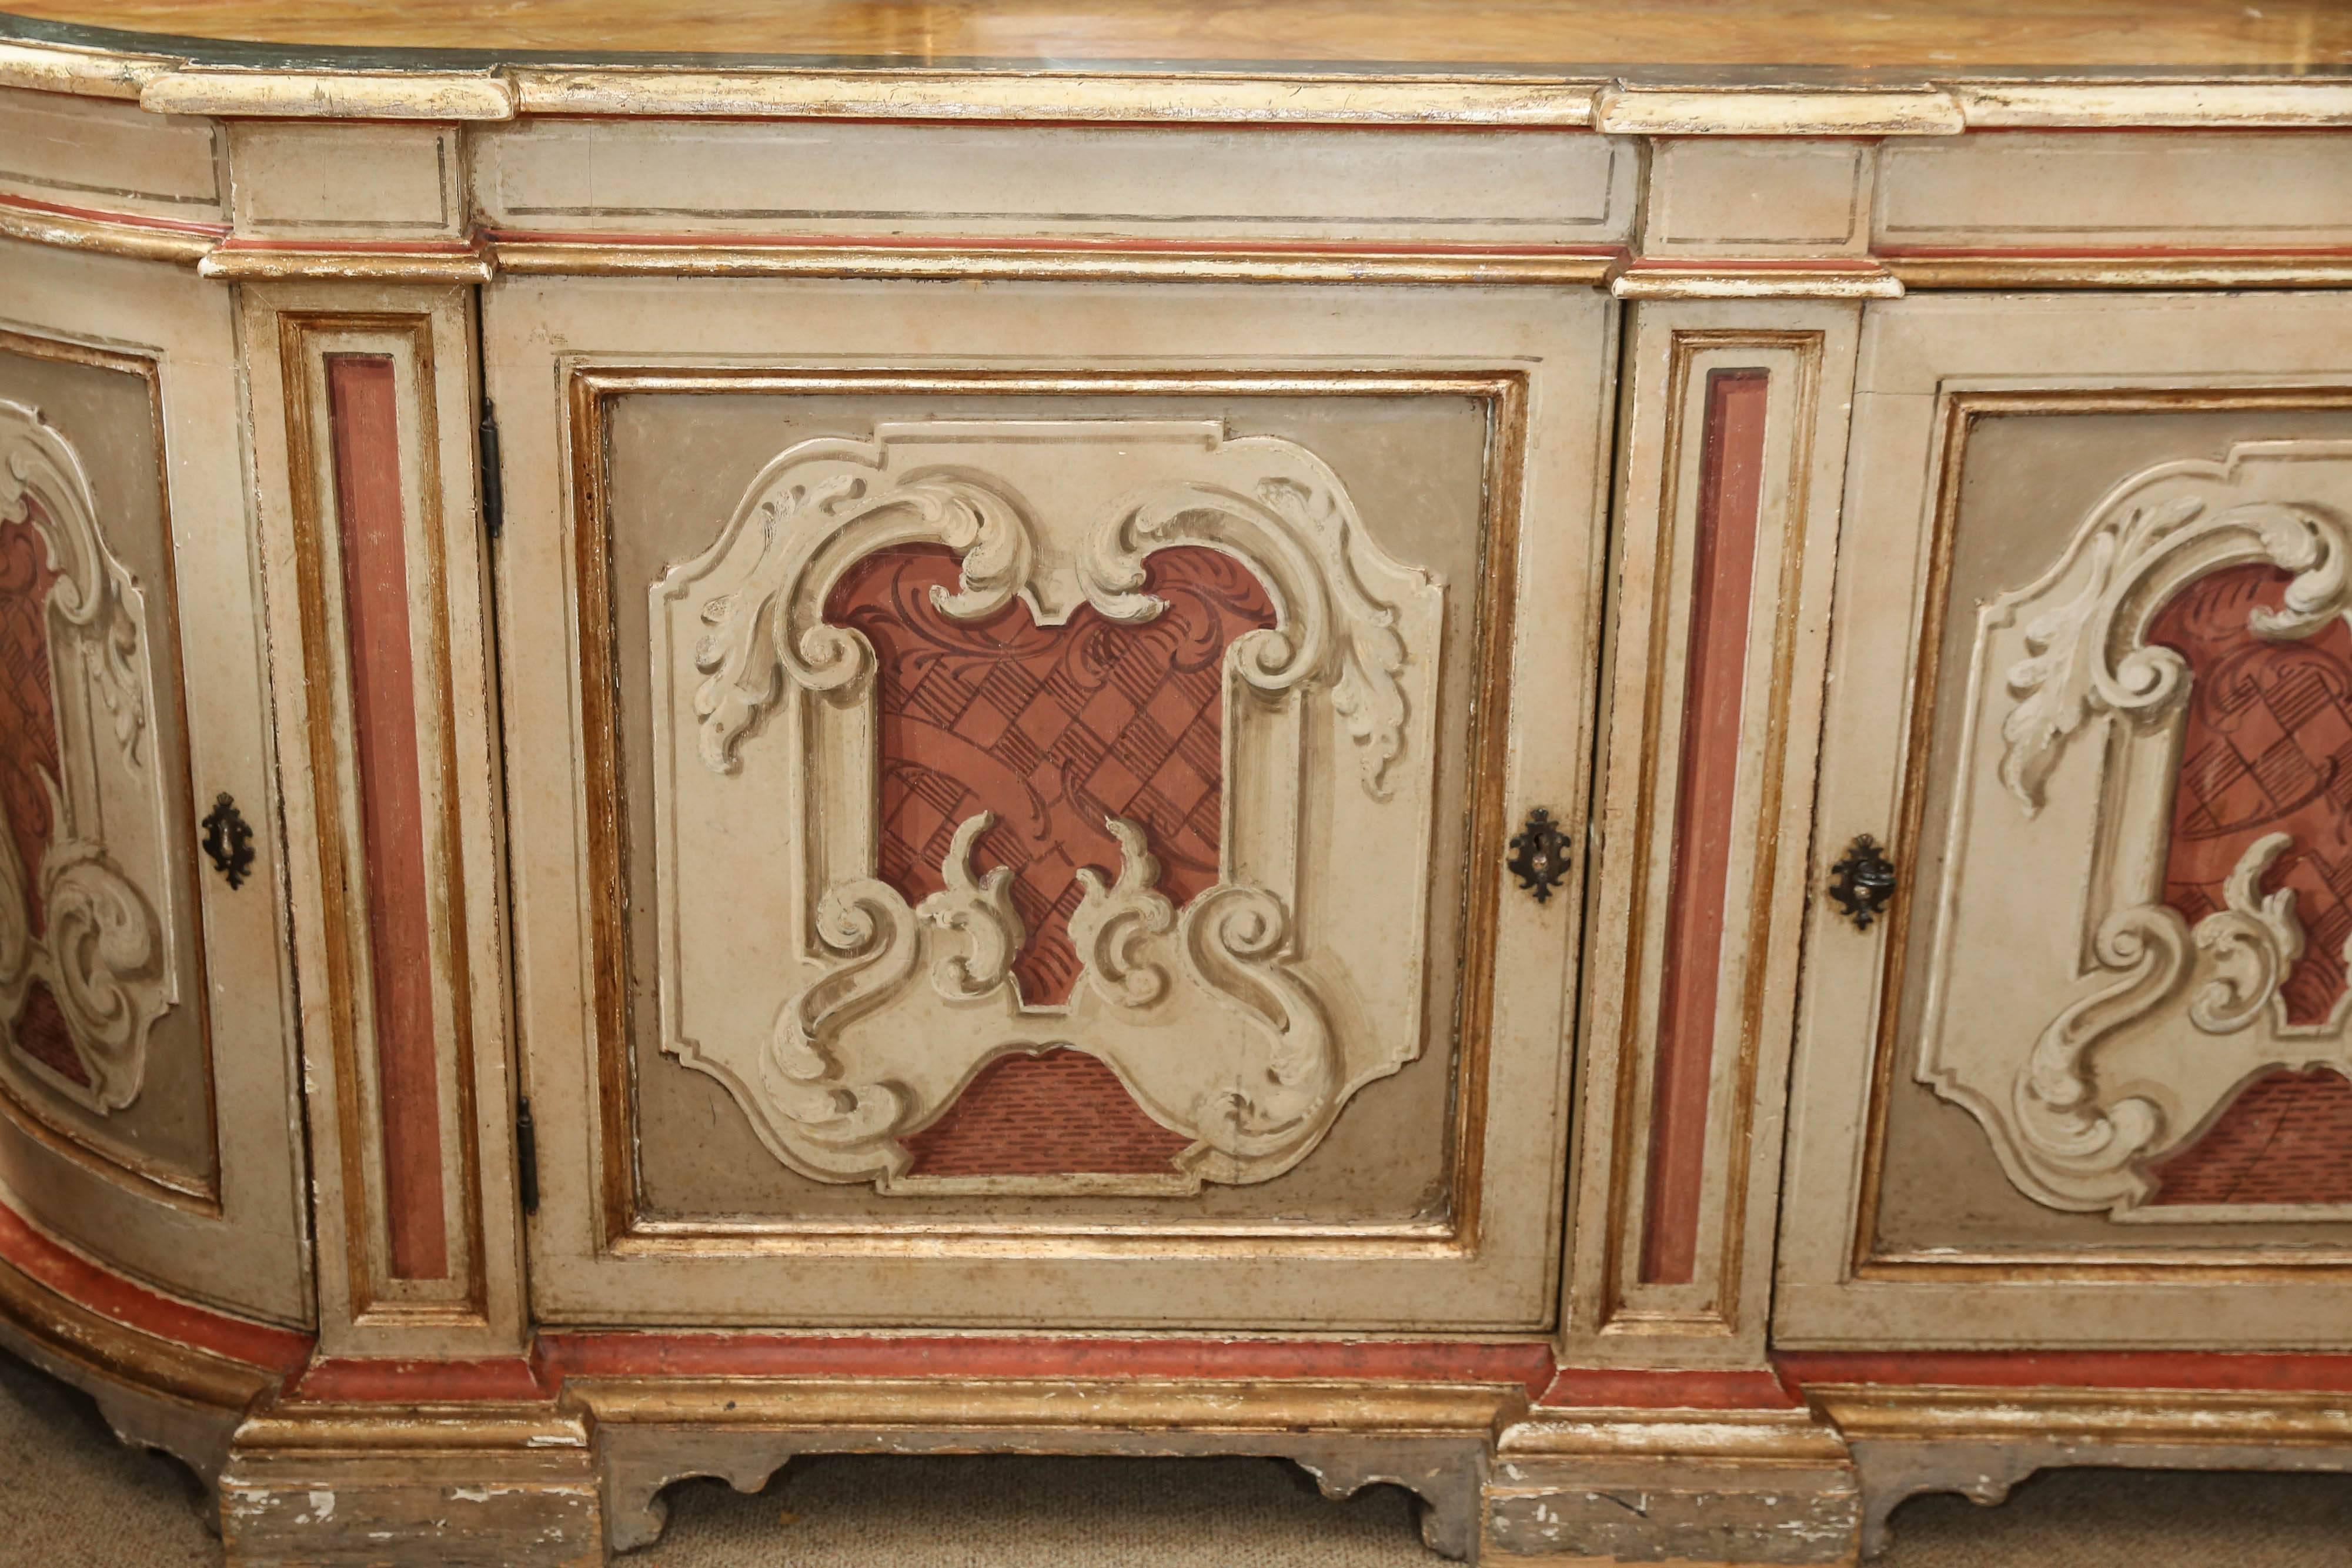 Beautiful faux marble-top finish over a conforming base with two doors
flanked by two rounded doors, each carved and painted with scrolling
design and supports, opens to single shelf interior. Has a key! Pale
gold and deep terracotta colors grace